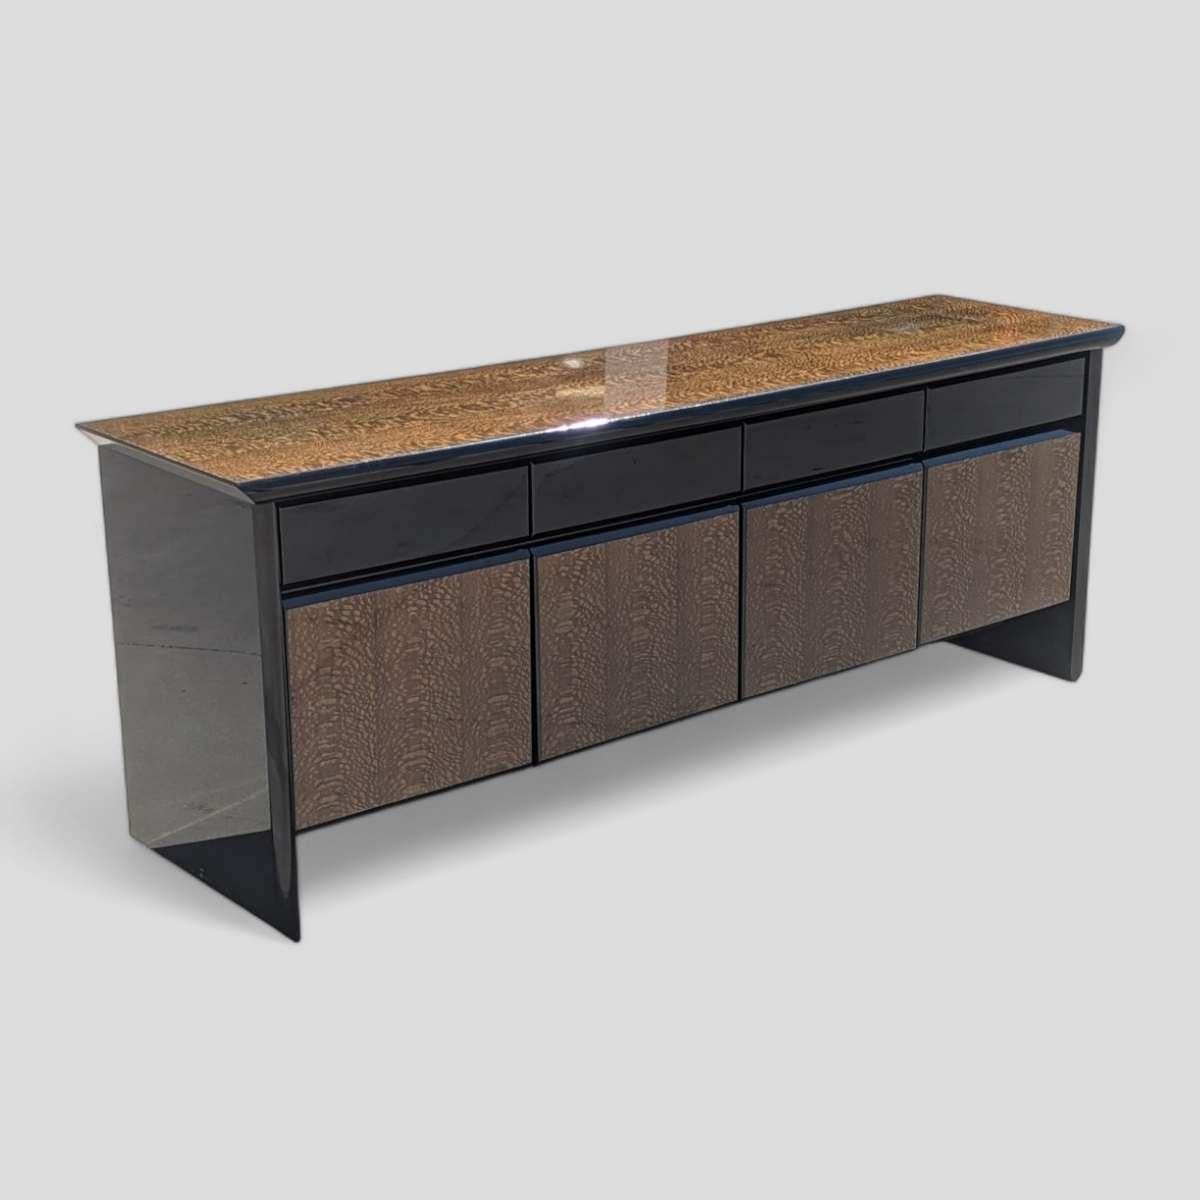 Step into the world of postmodern luxury with this extraordinary sideboard from the esteemed Giorgio Collection. Crafted in Italy, this piece embodies the boldness and experimentation that defined the postmodern design movement.

The sideboard's